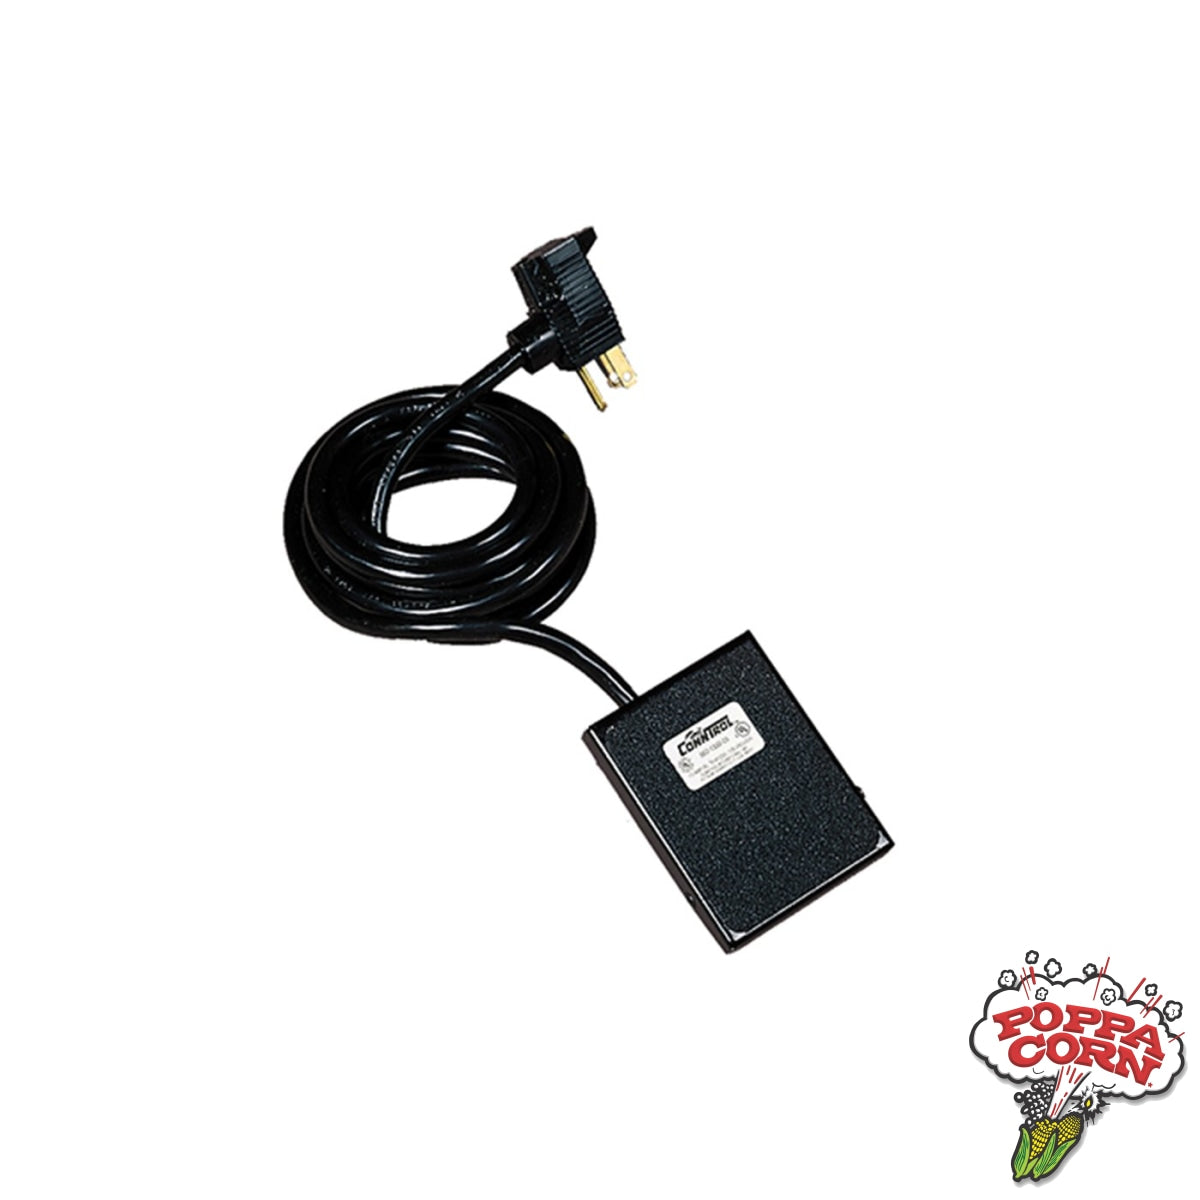 Maxim-Icer Foot Switch for Ice Shaver - Poppa Corn Corp